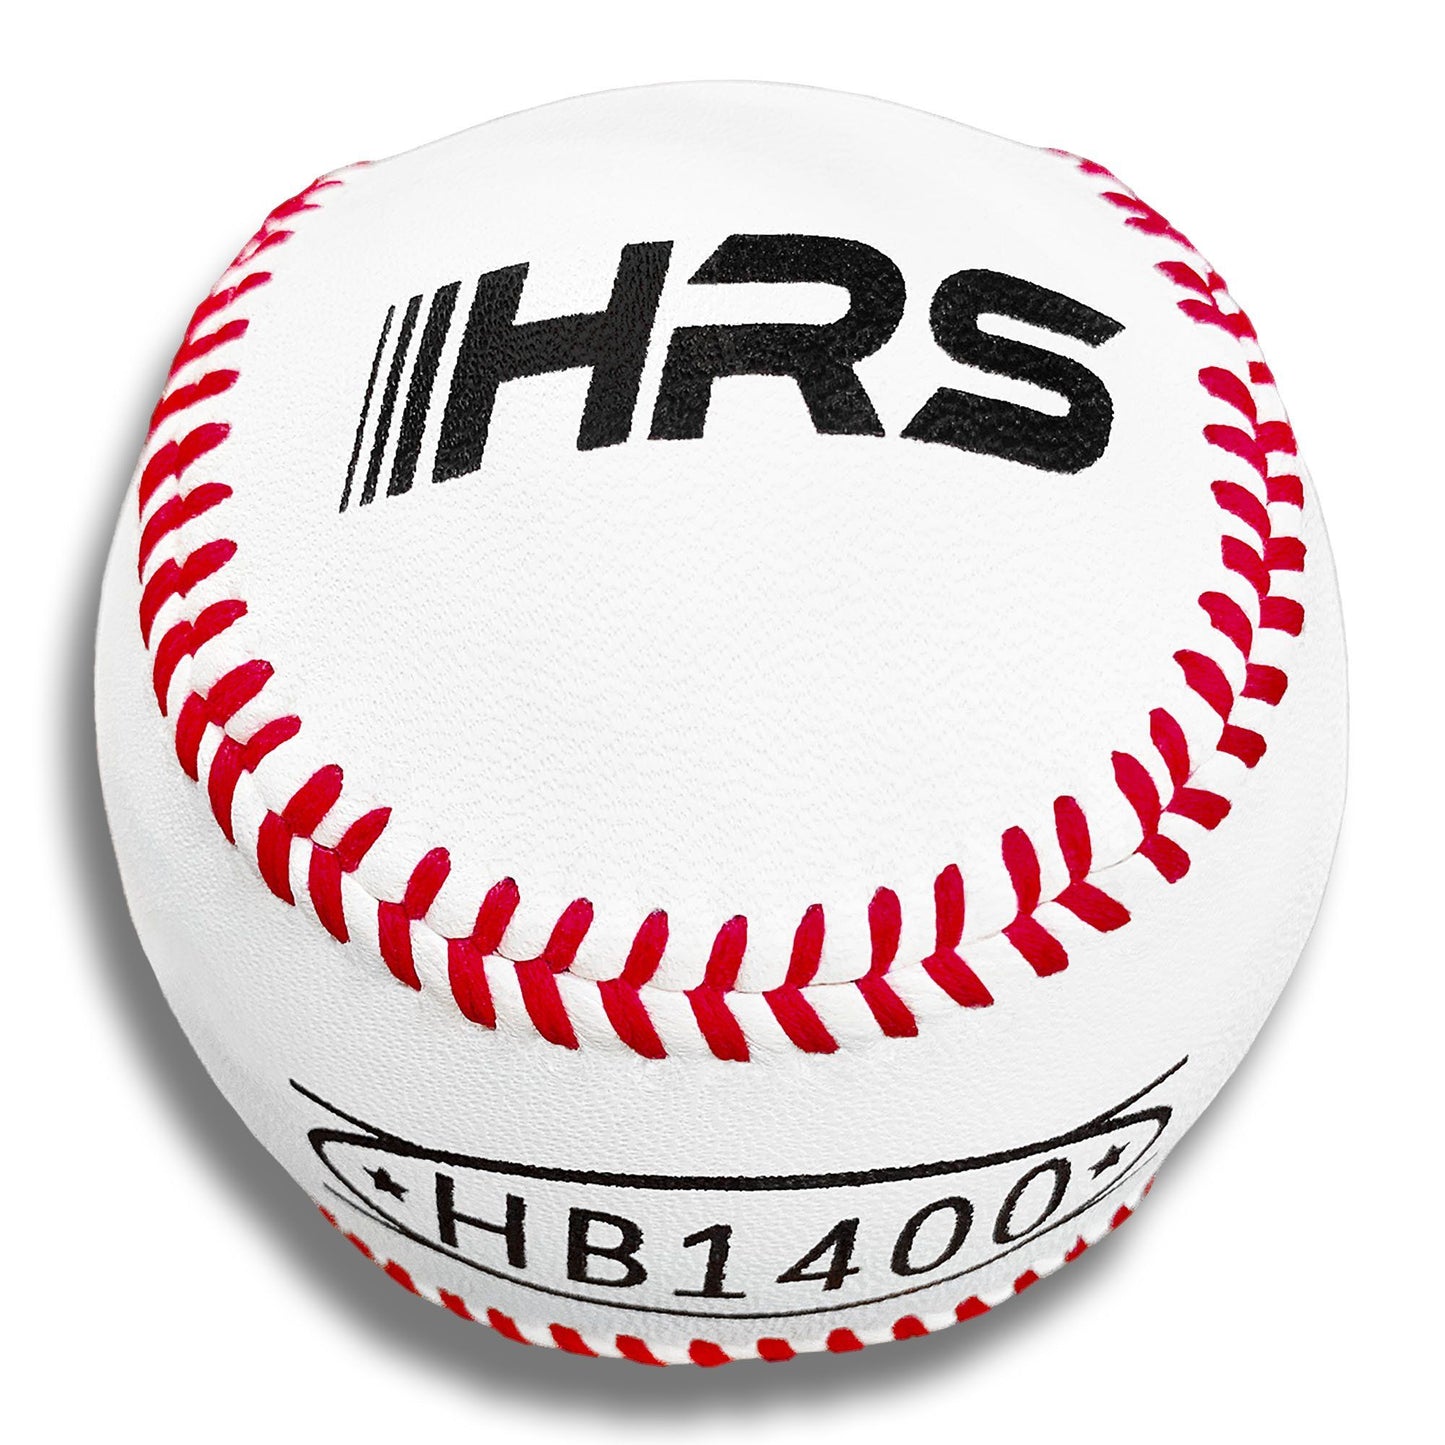 Game Baseballs for Youth and Adult Baseball Players - Official Size And Weight